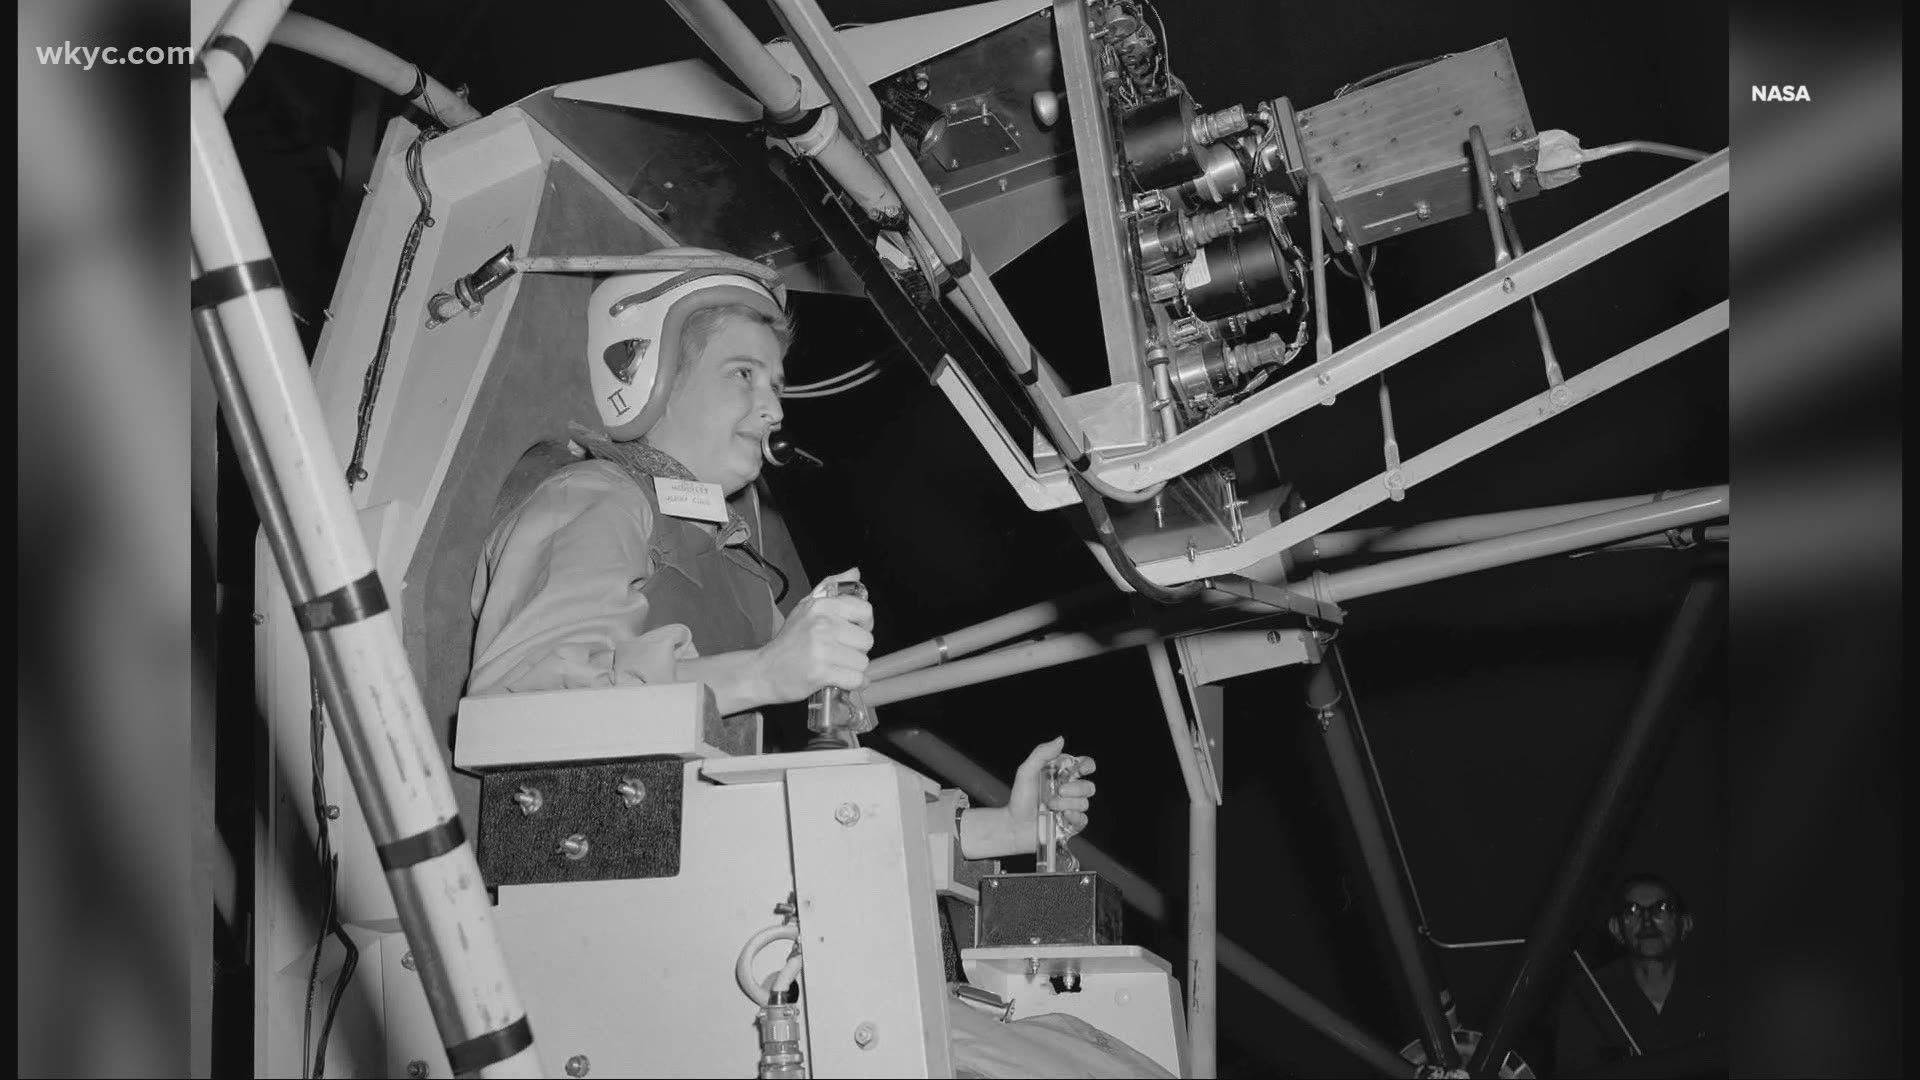 Mary Wallace Funk -- known as "Wally" -- was one of 13 women who trained to be astronauts 60 years ago, in the privately funded program.